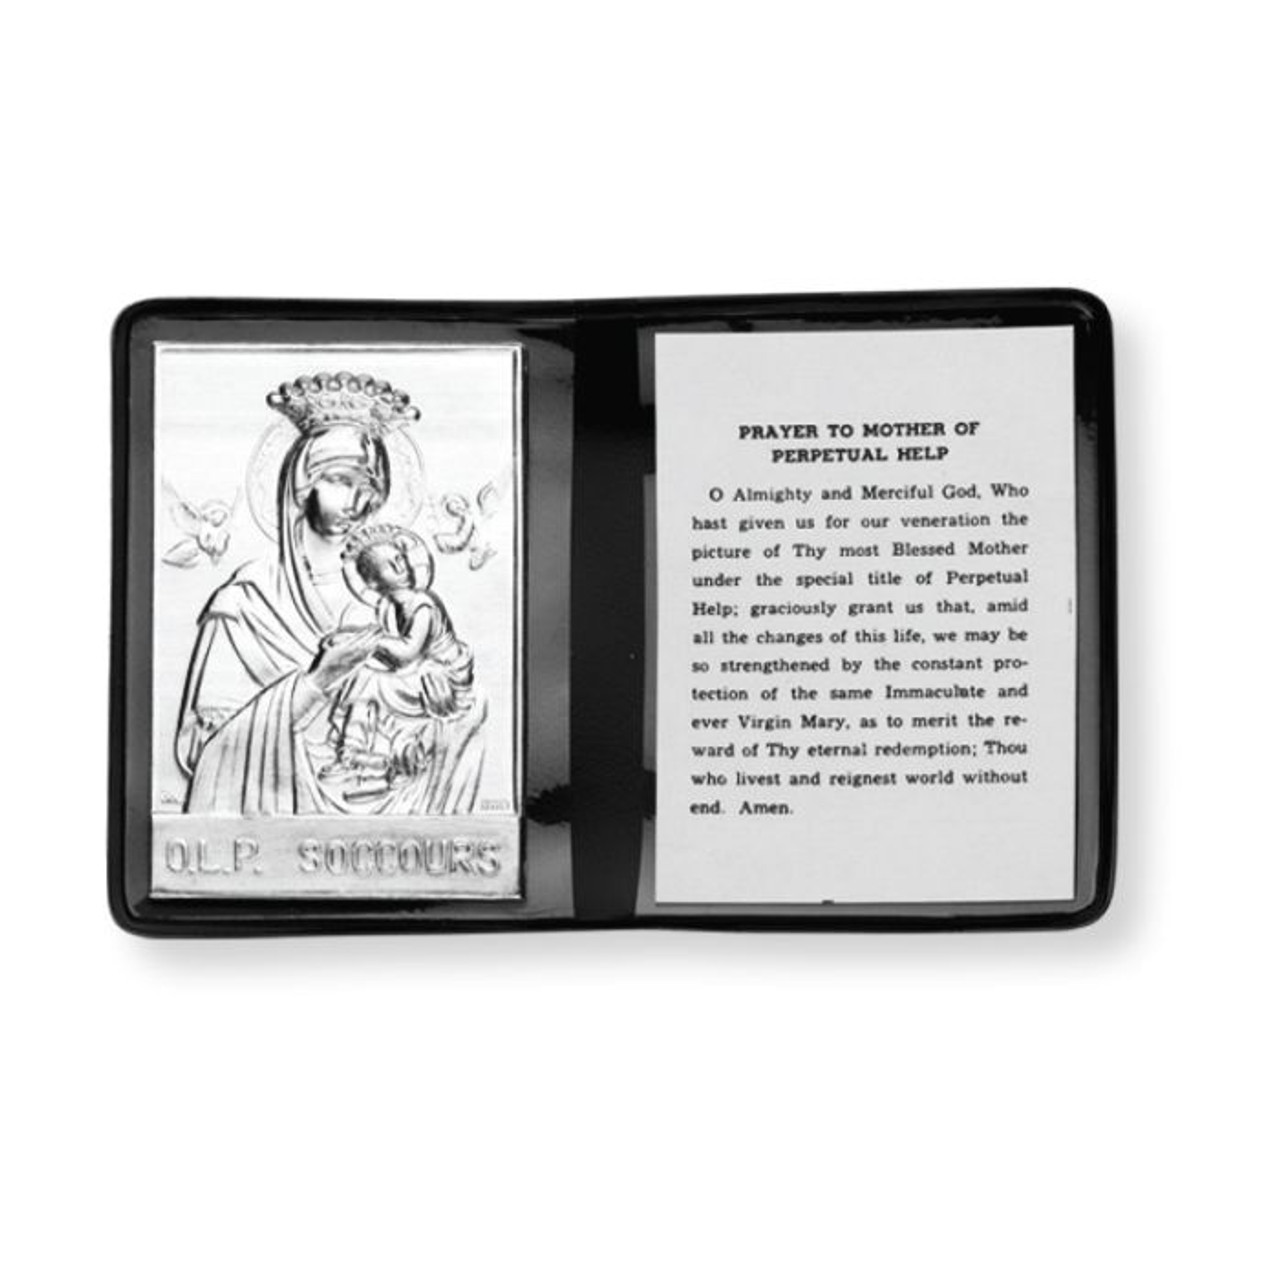 Our Lady of Perpetual Help Metal Plaque in Folder